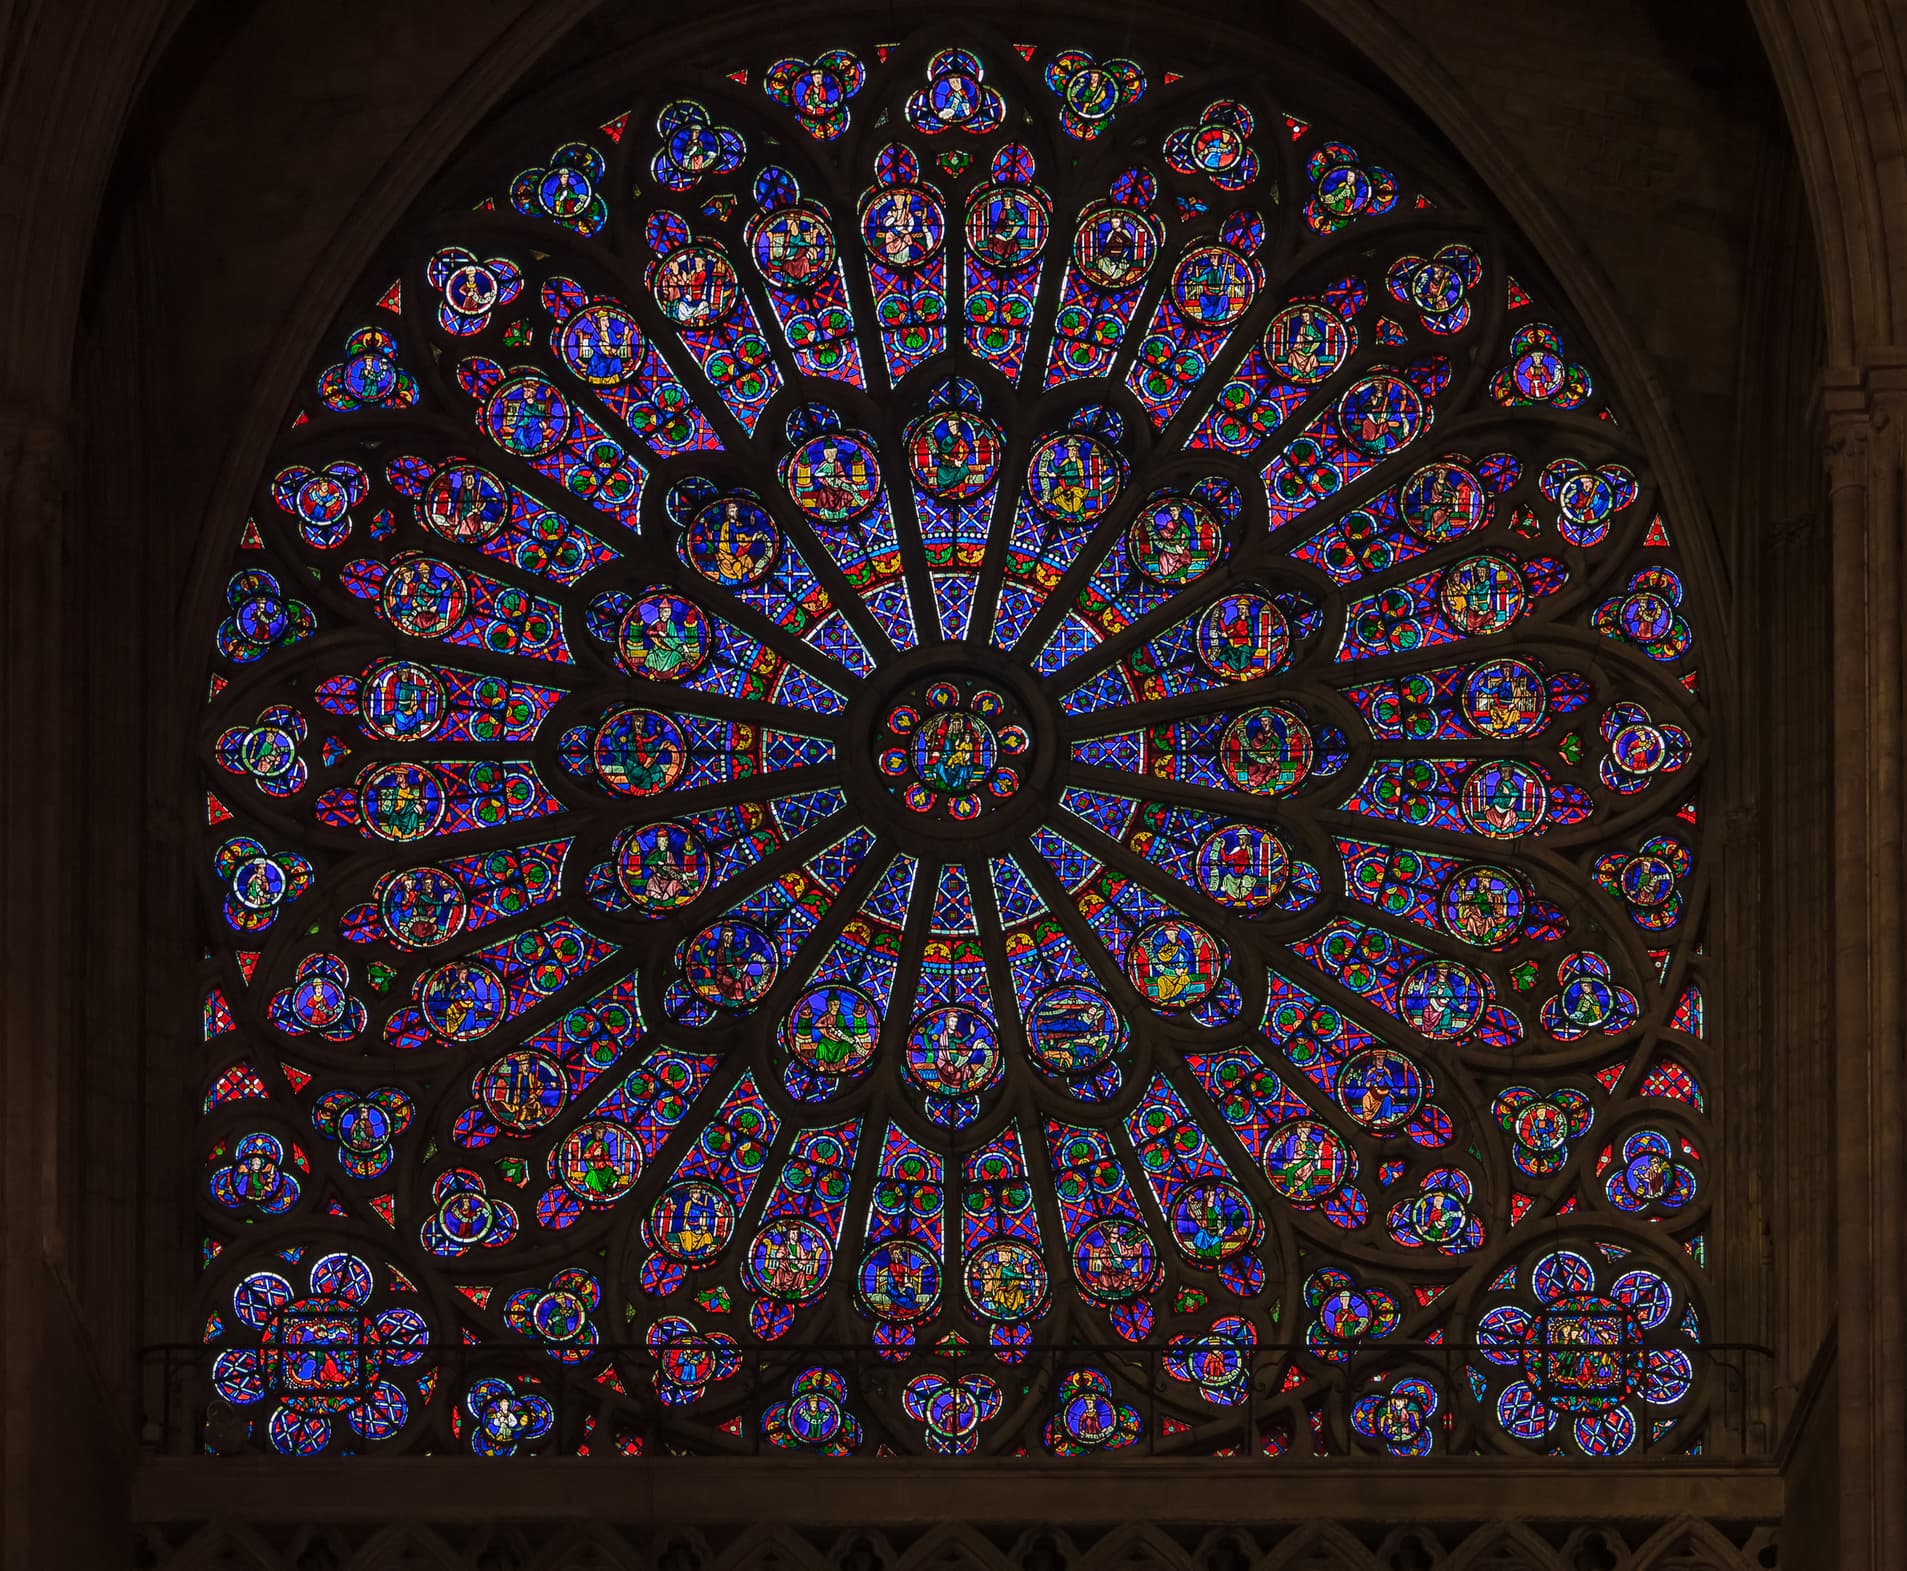 A view of a large stained-glass rose window at the Cathedral of Notre-Dame, Paris.